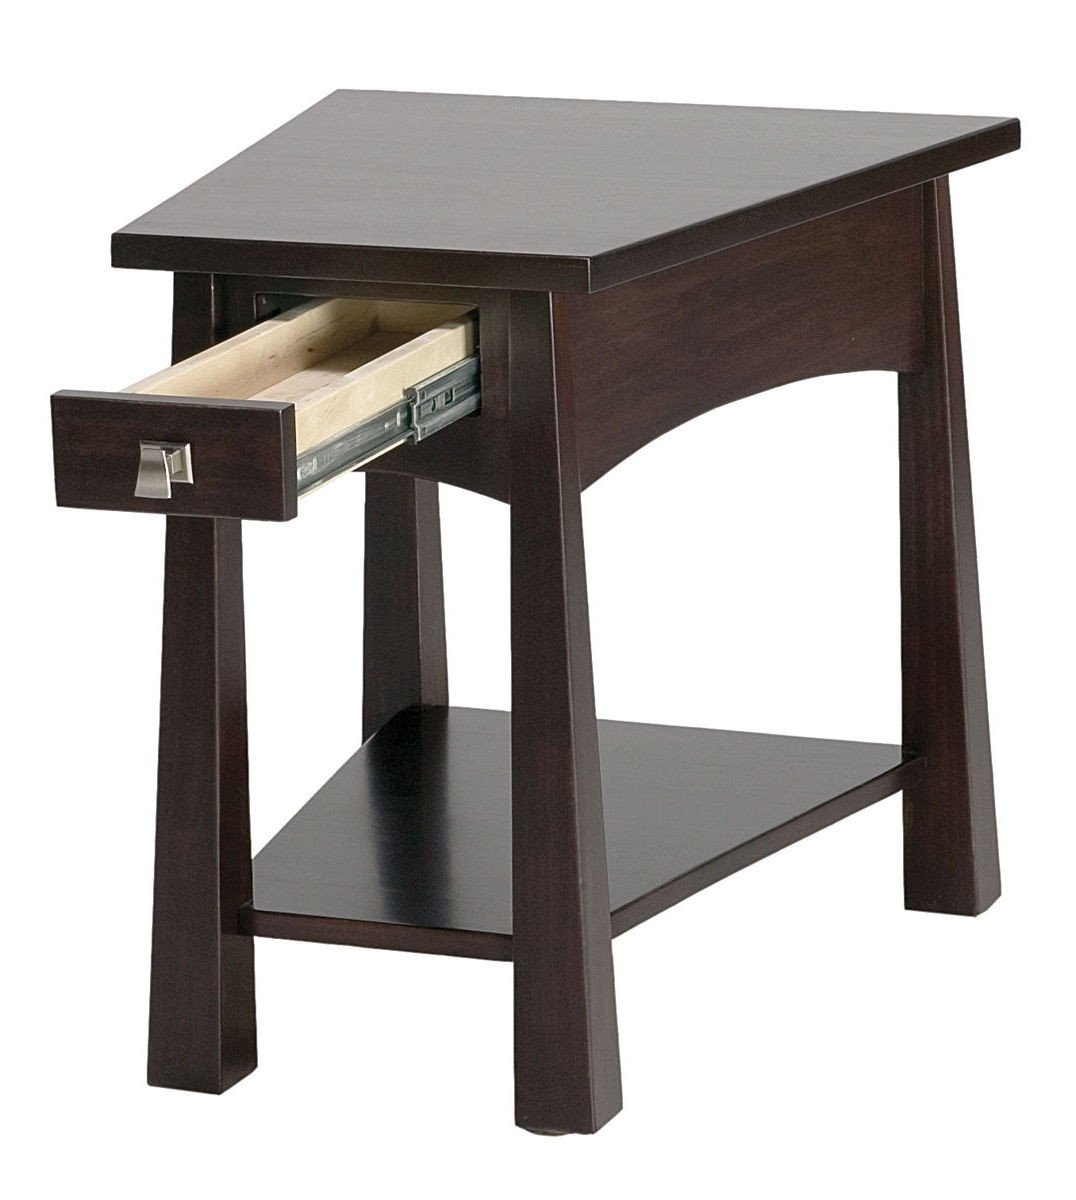 Small Living Room Table
 Living Room End Tables Furniture for Small Living Room